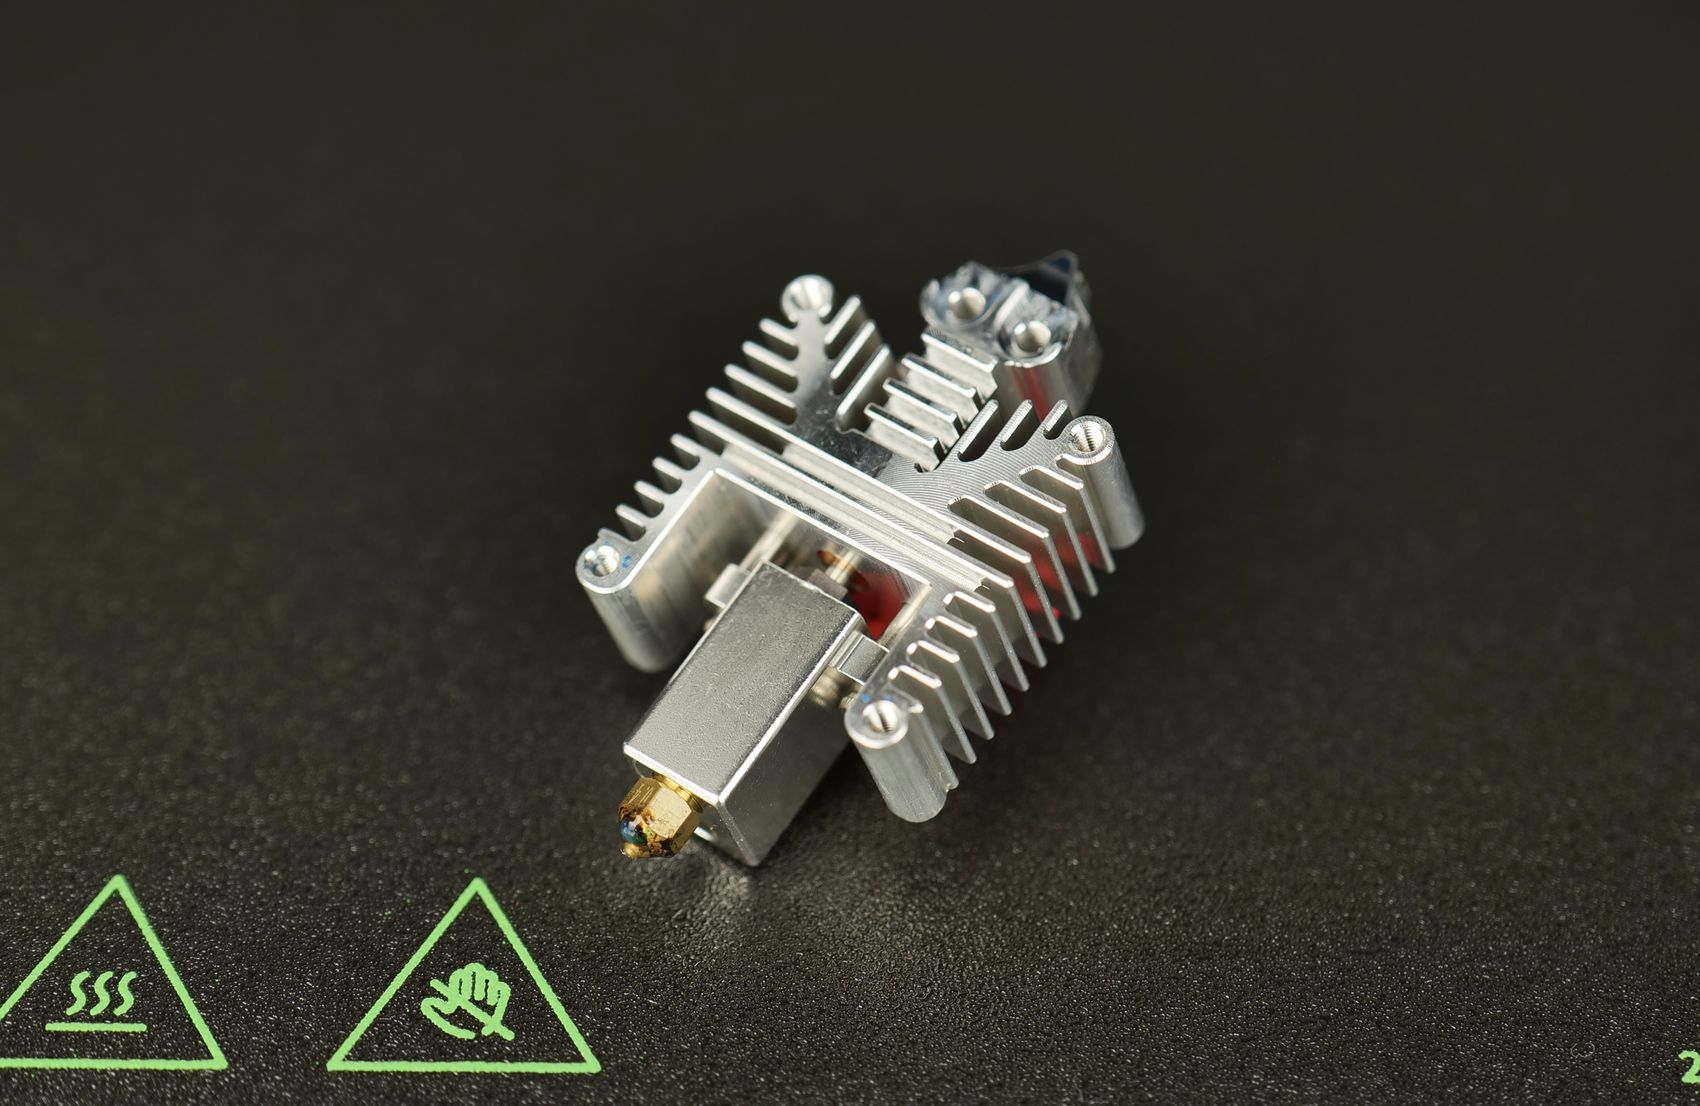 AnkerMake M5C Hotend Assembly3 | AnkerMake M5C Review